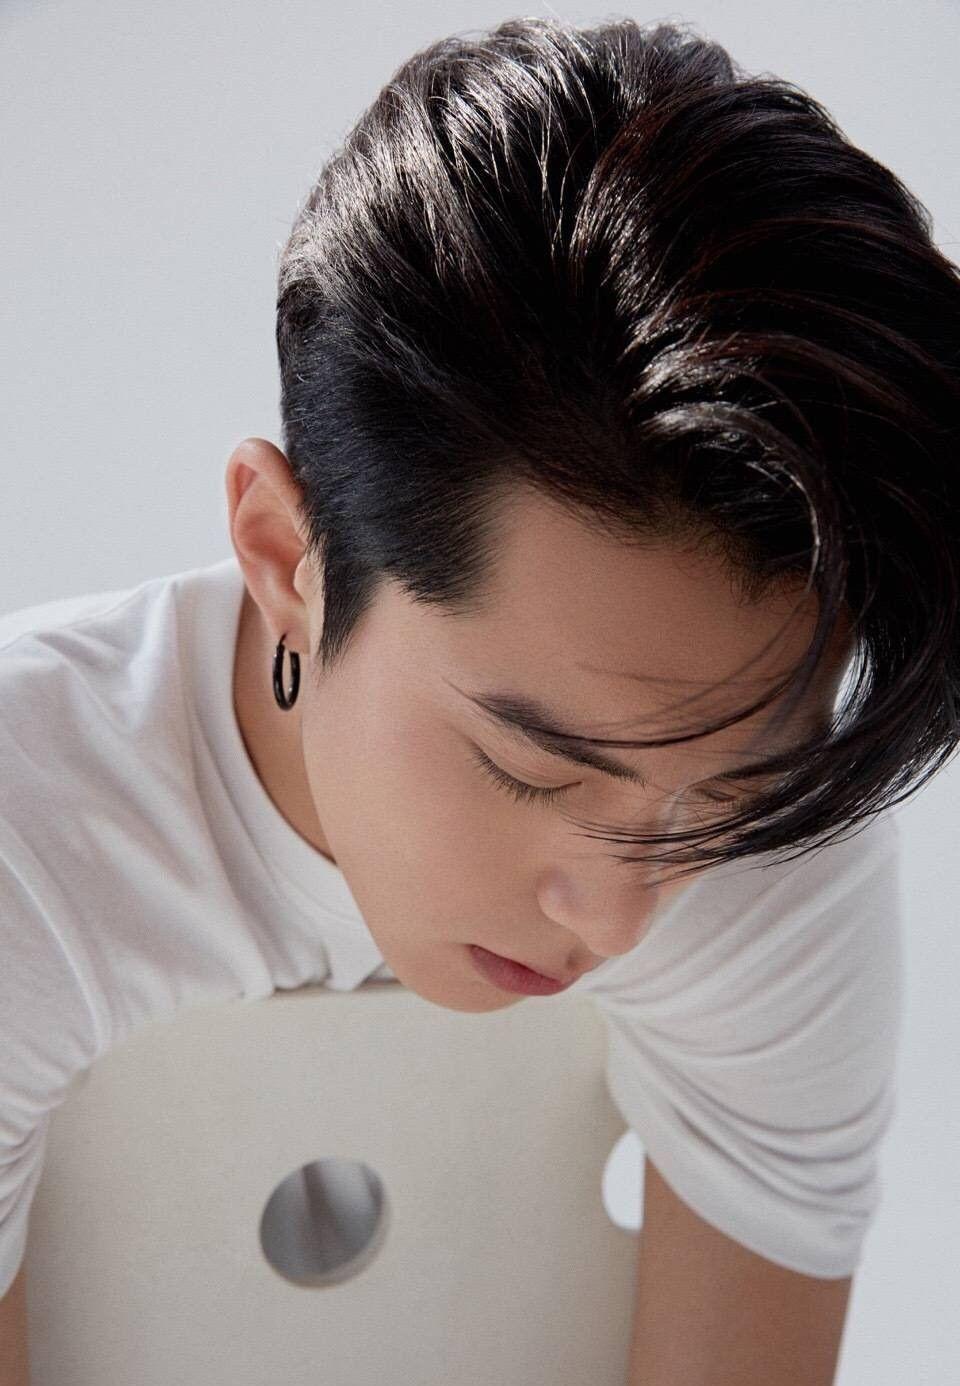 Dylan Wang ❤. Boys boys. Meteor garden, Handsome and Idol